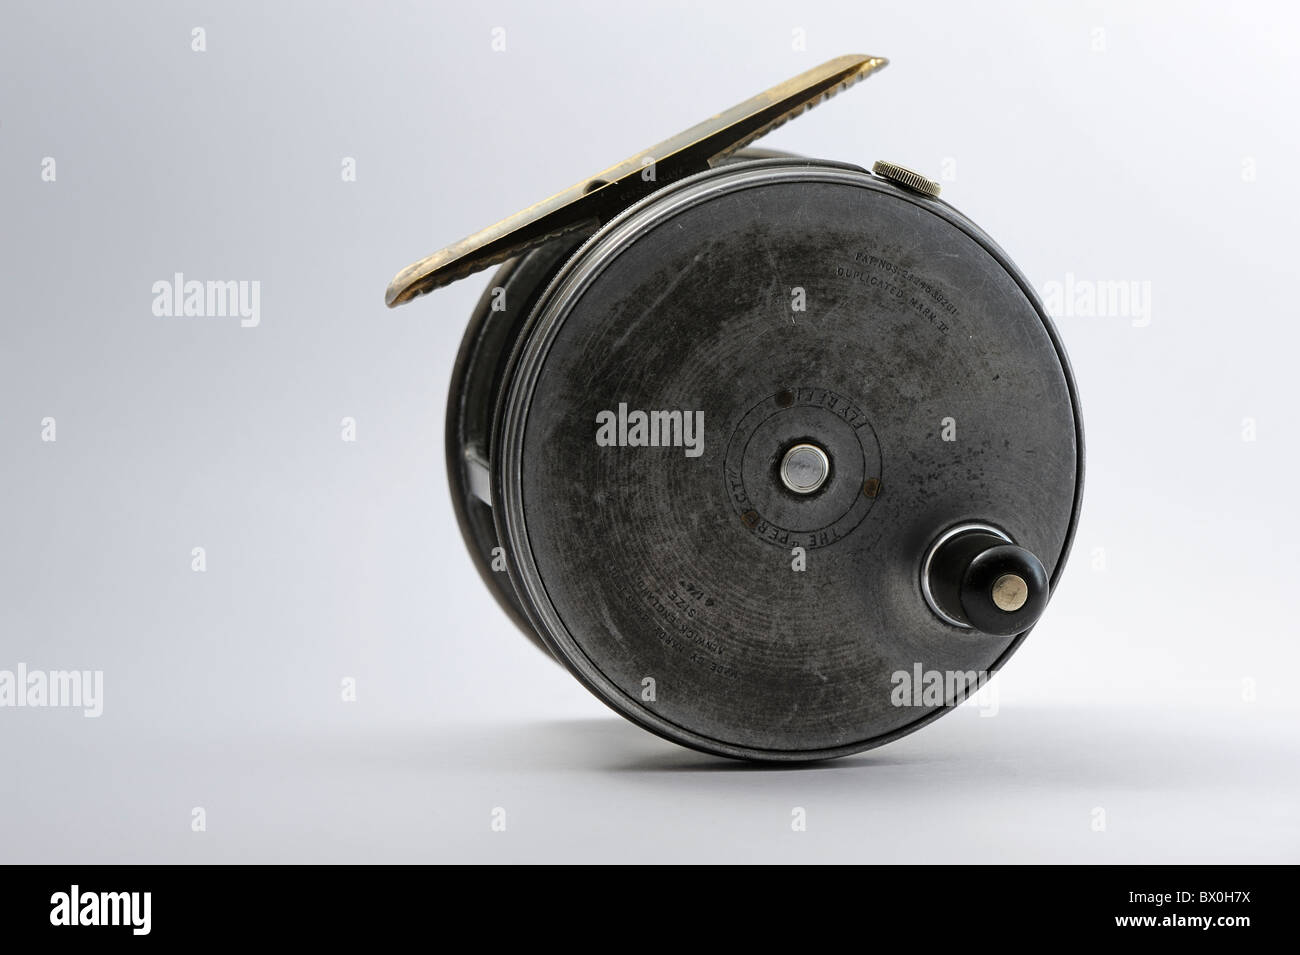 Hardy Perfect antique Salmon fly fishing reel against a plain white background Stock Photo